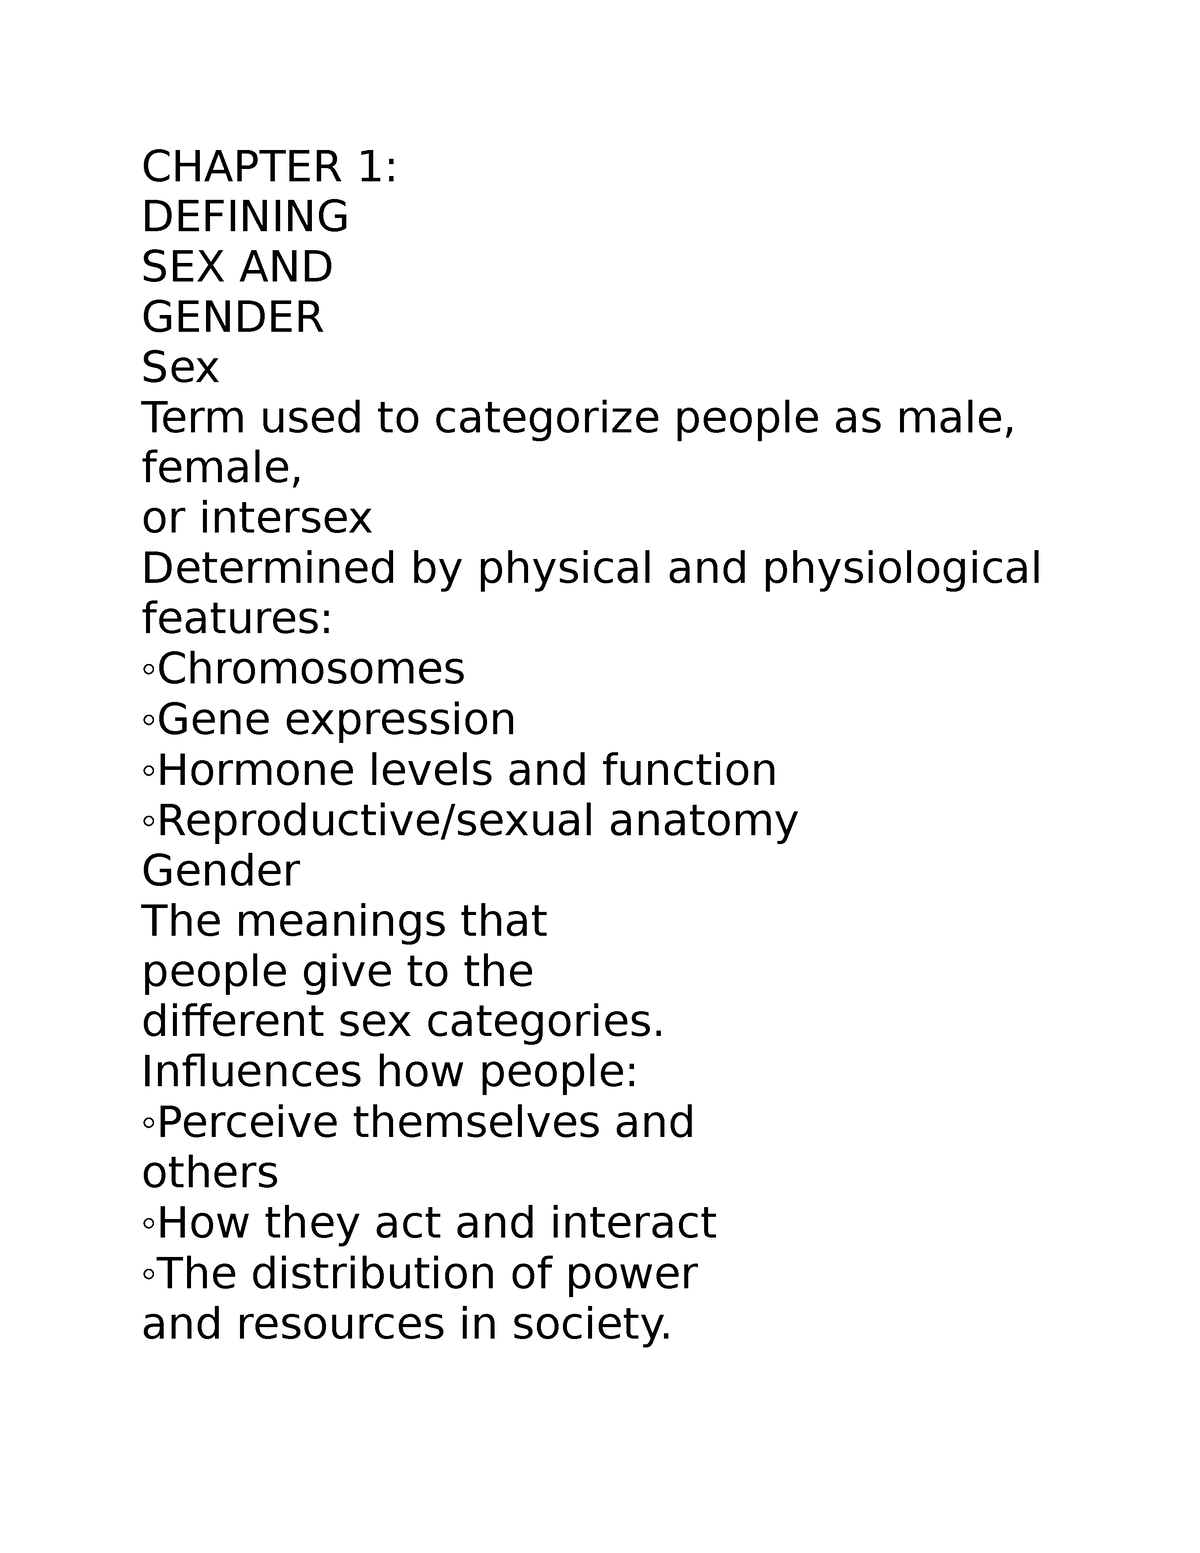 Sex And Gender Notes Chapter 1 Defining Sex And Gender Sex Term Used To Categorize People 6528